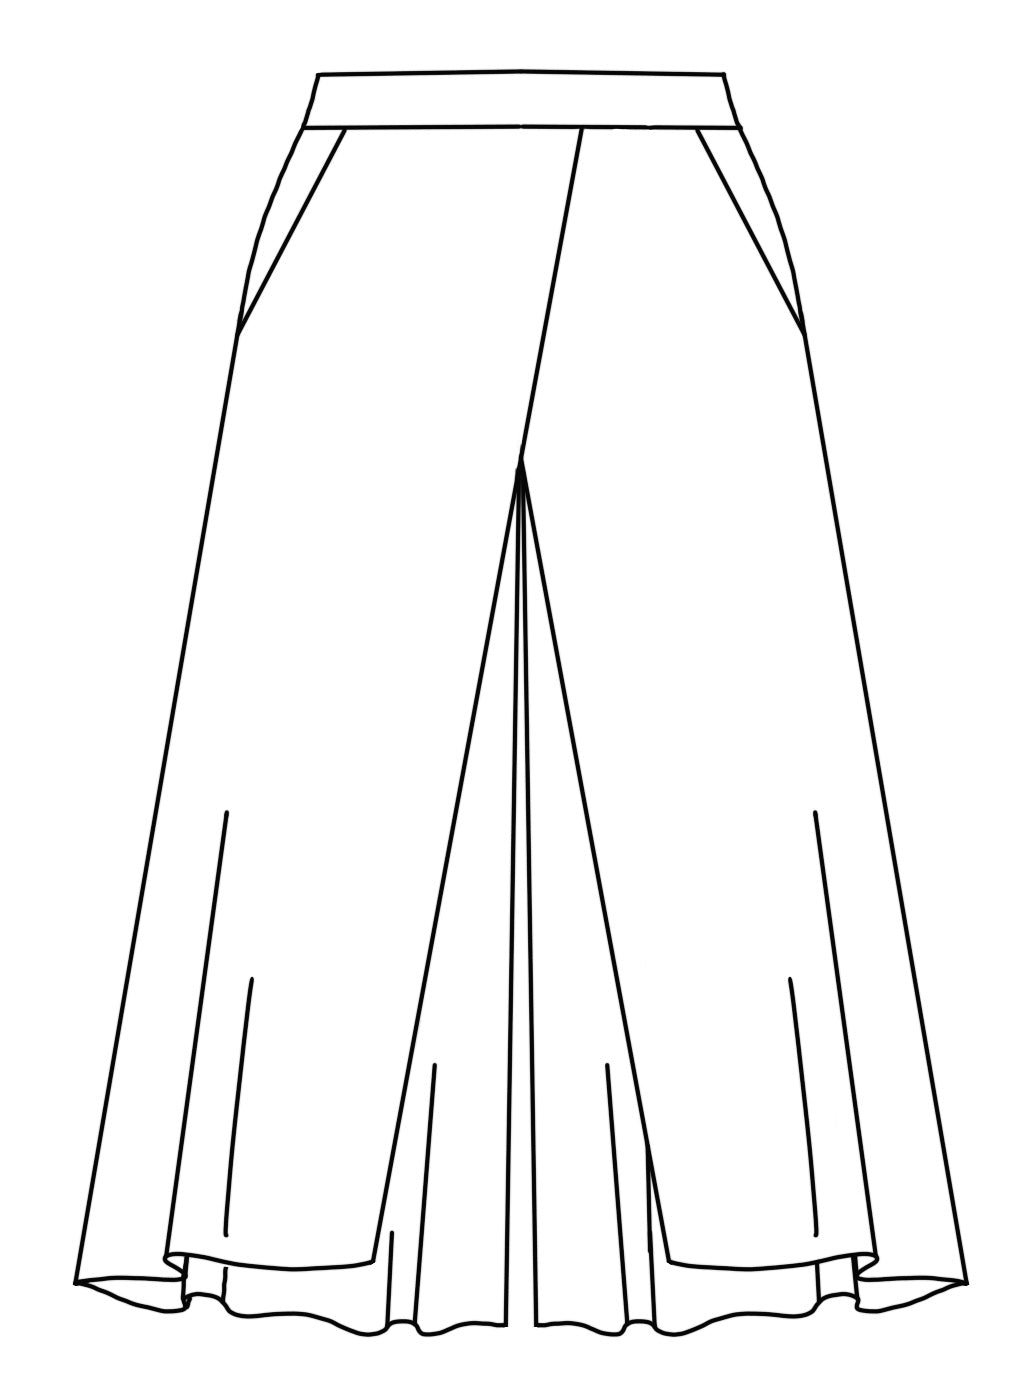 flat drawing of pants with a front overlay